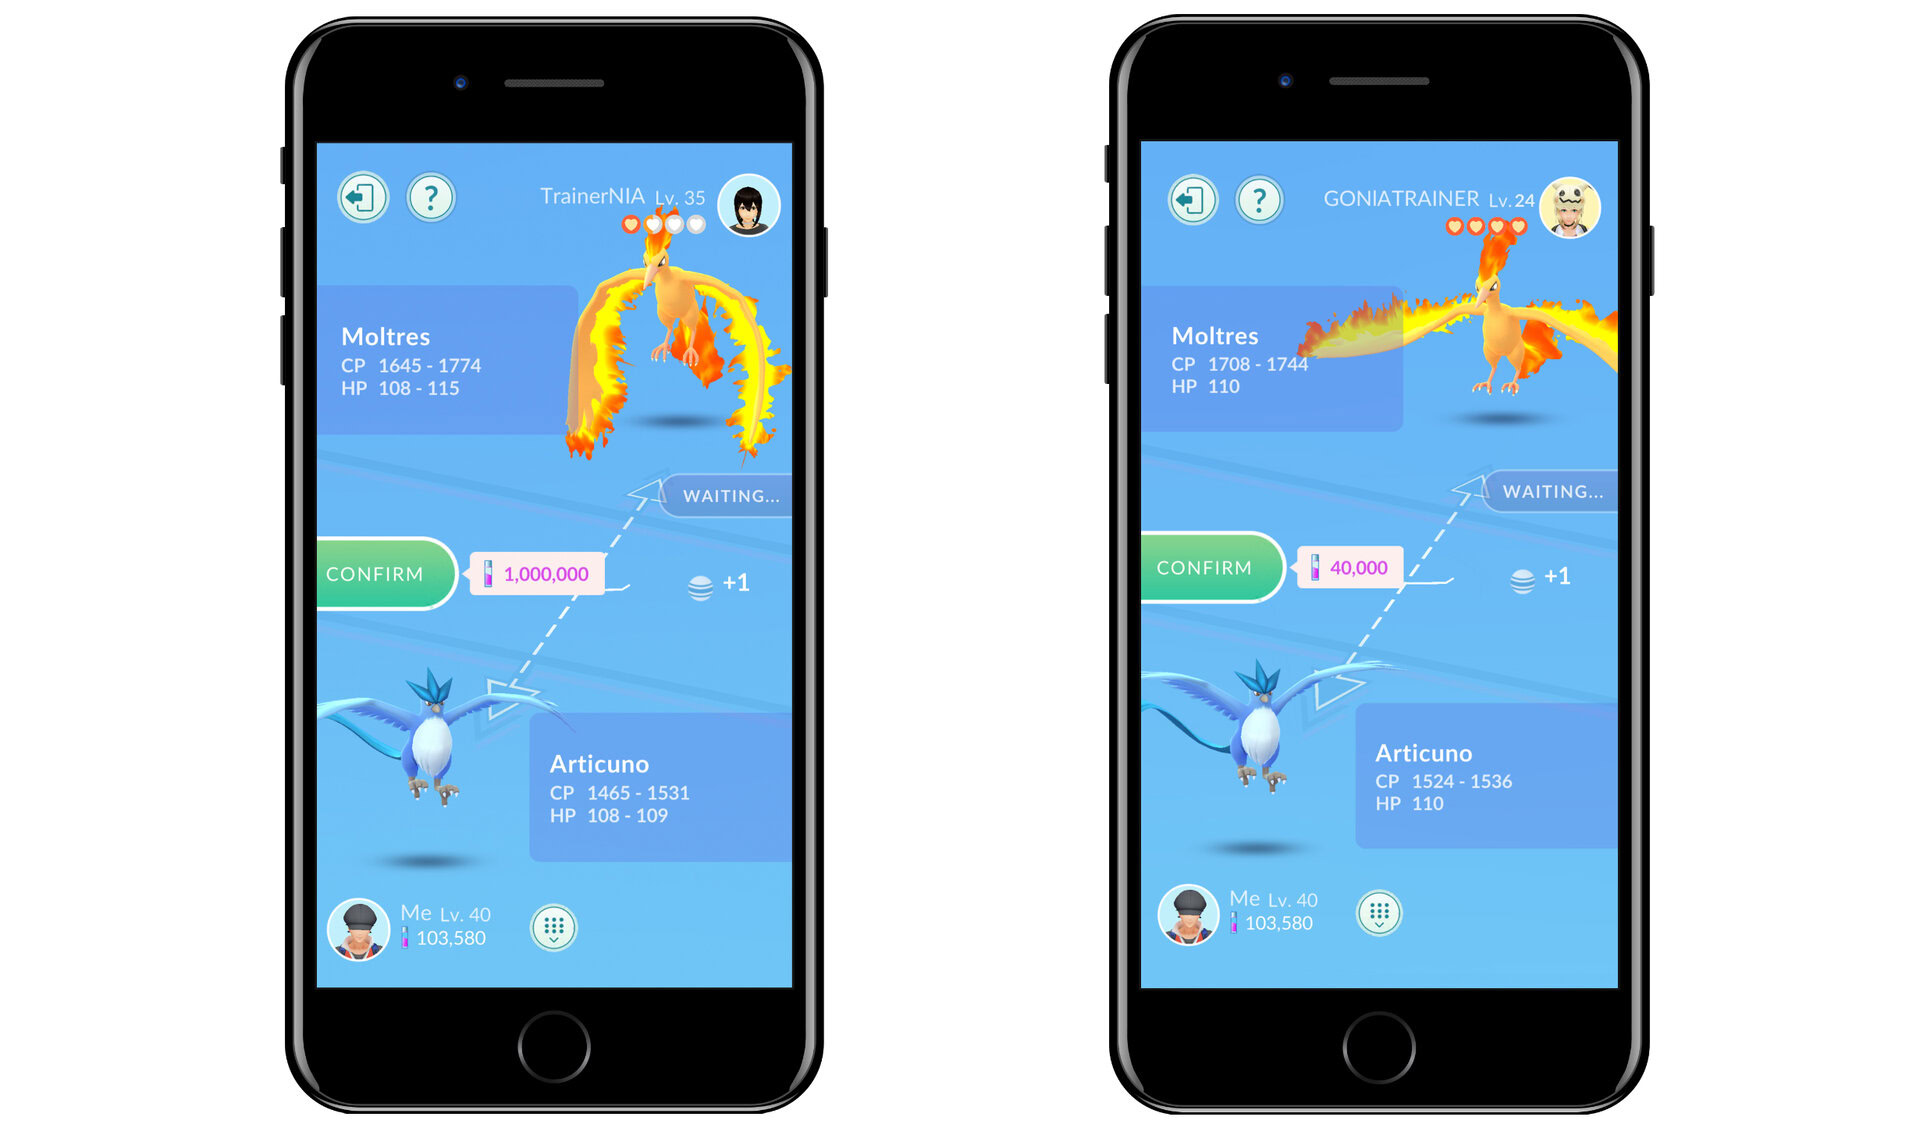 Make Way for Friends, Trading, and Gifting in Pokémon GO!